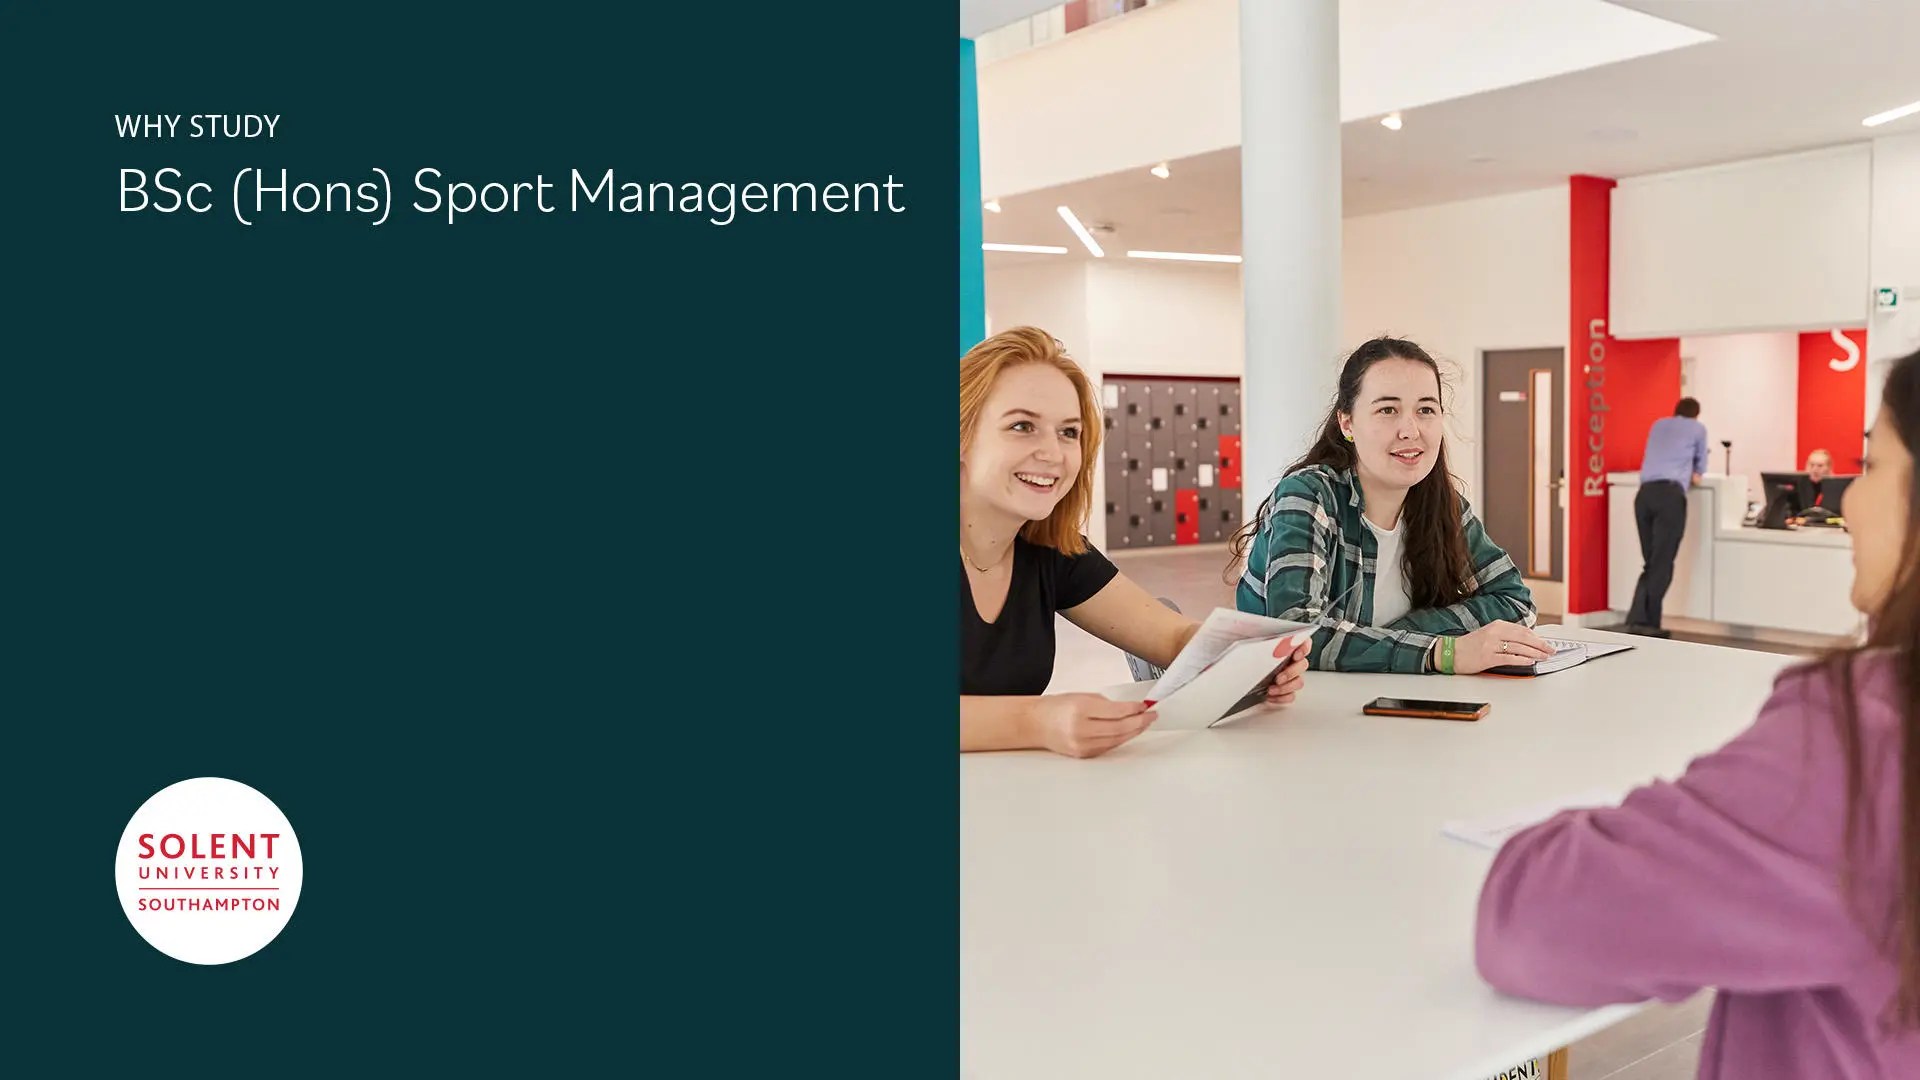 Image reads Why study BSc (Hons) Sport Management